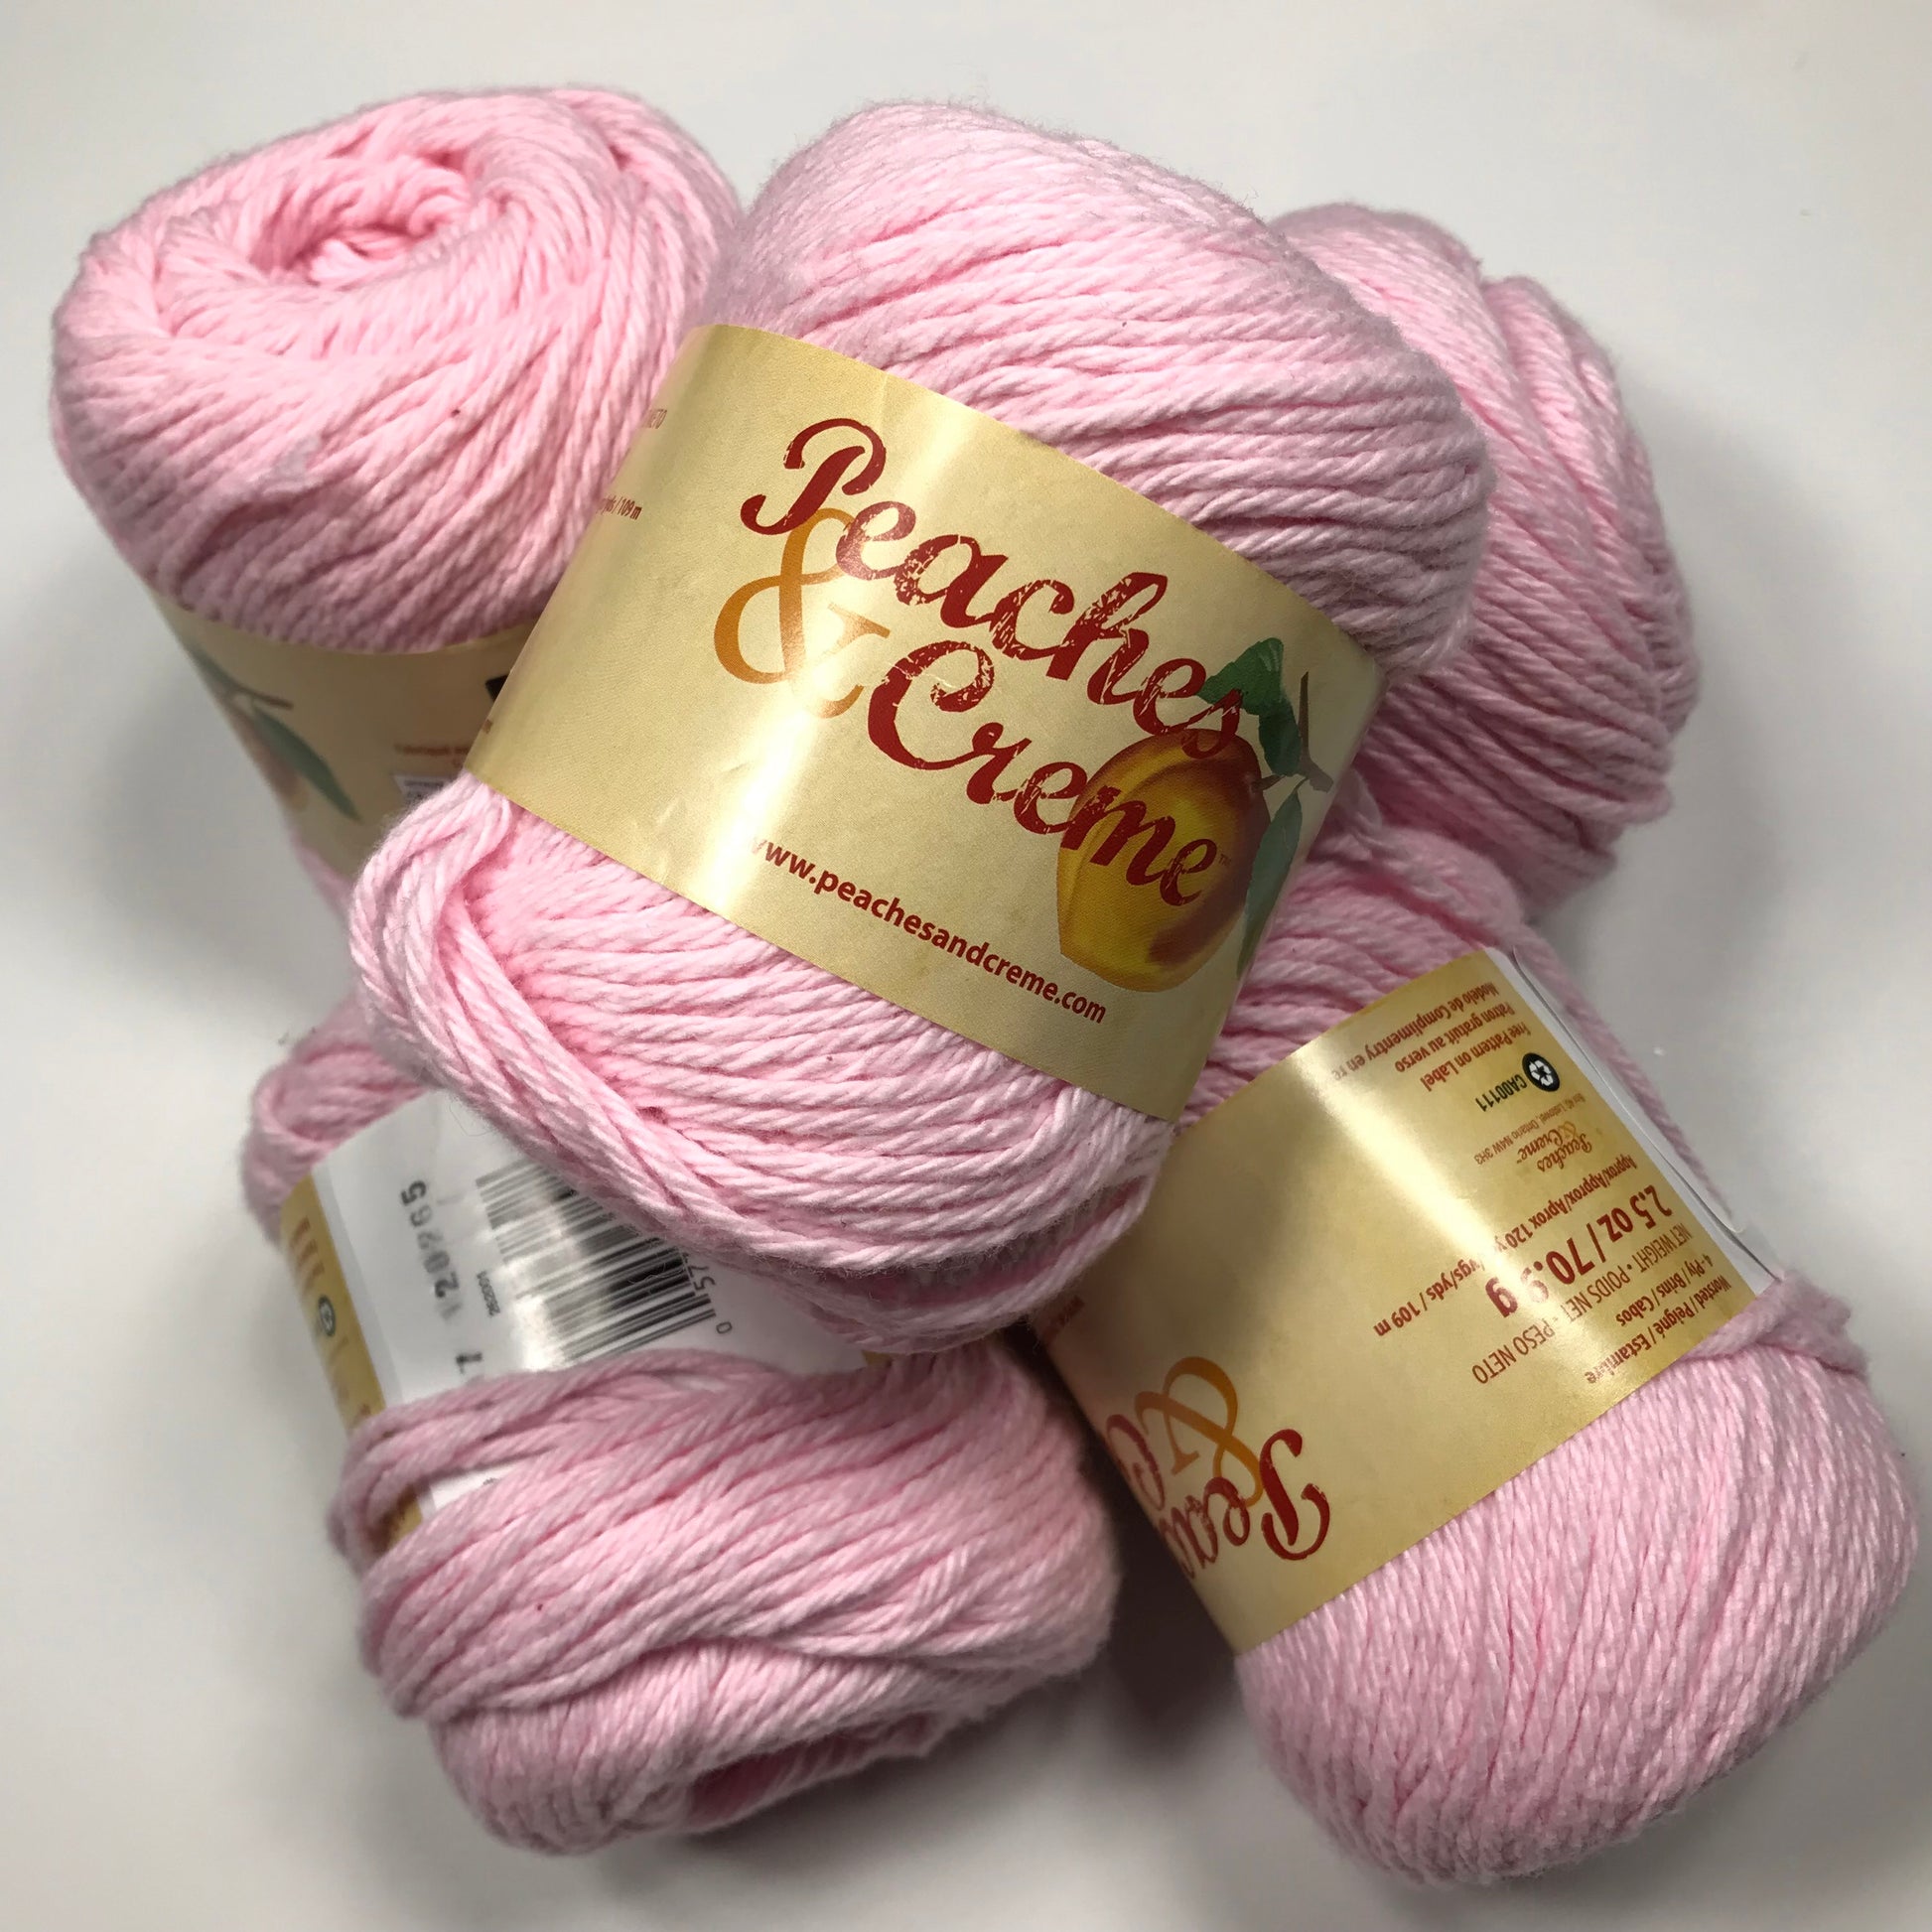 Cotton Yarn in Pink, Peaches and Cream, Pastel Pink Cotton Yarn 